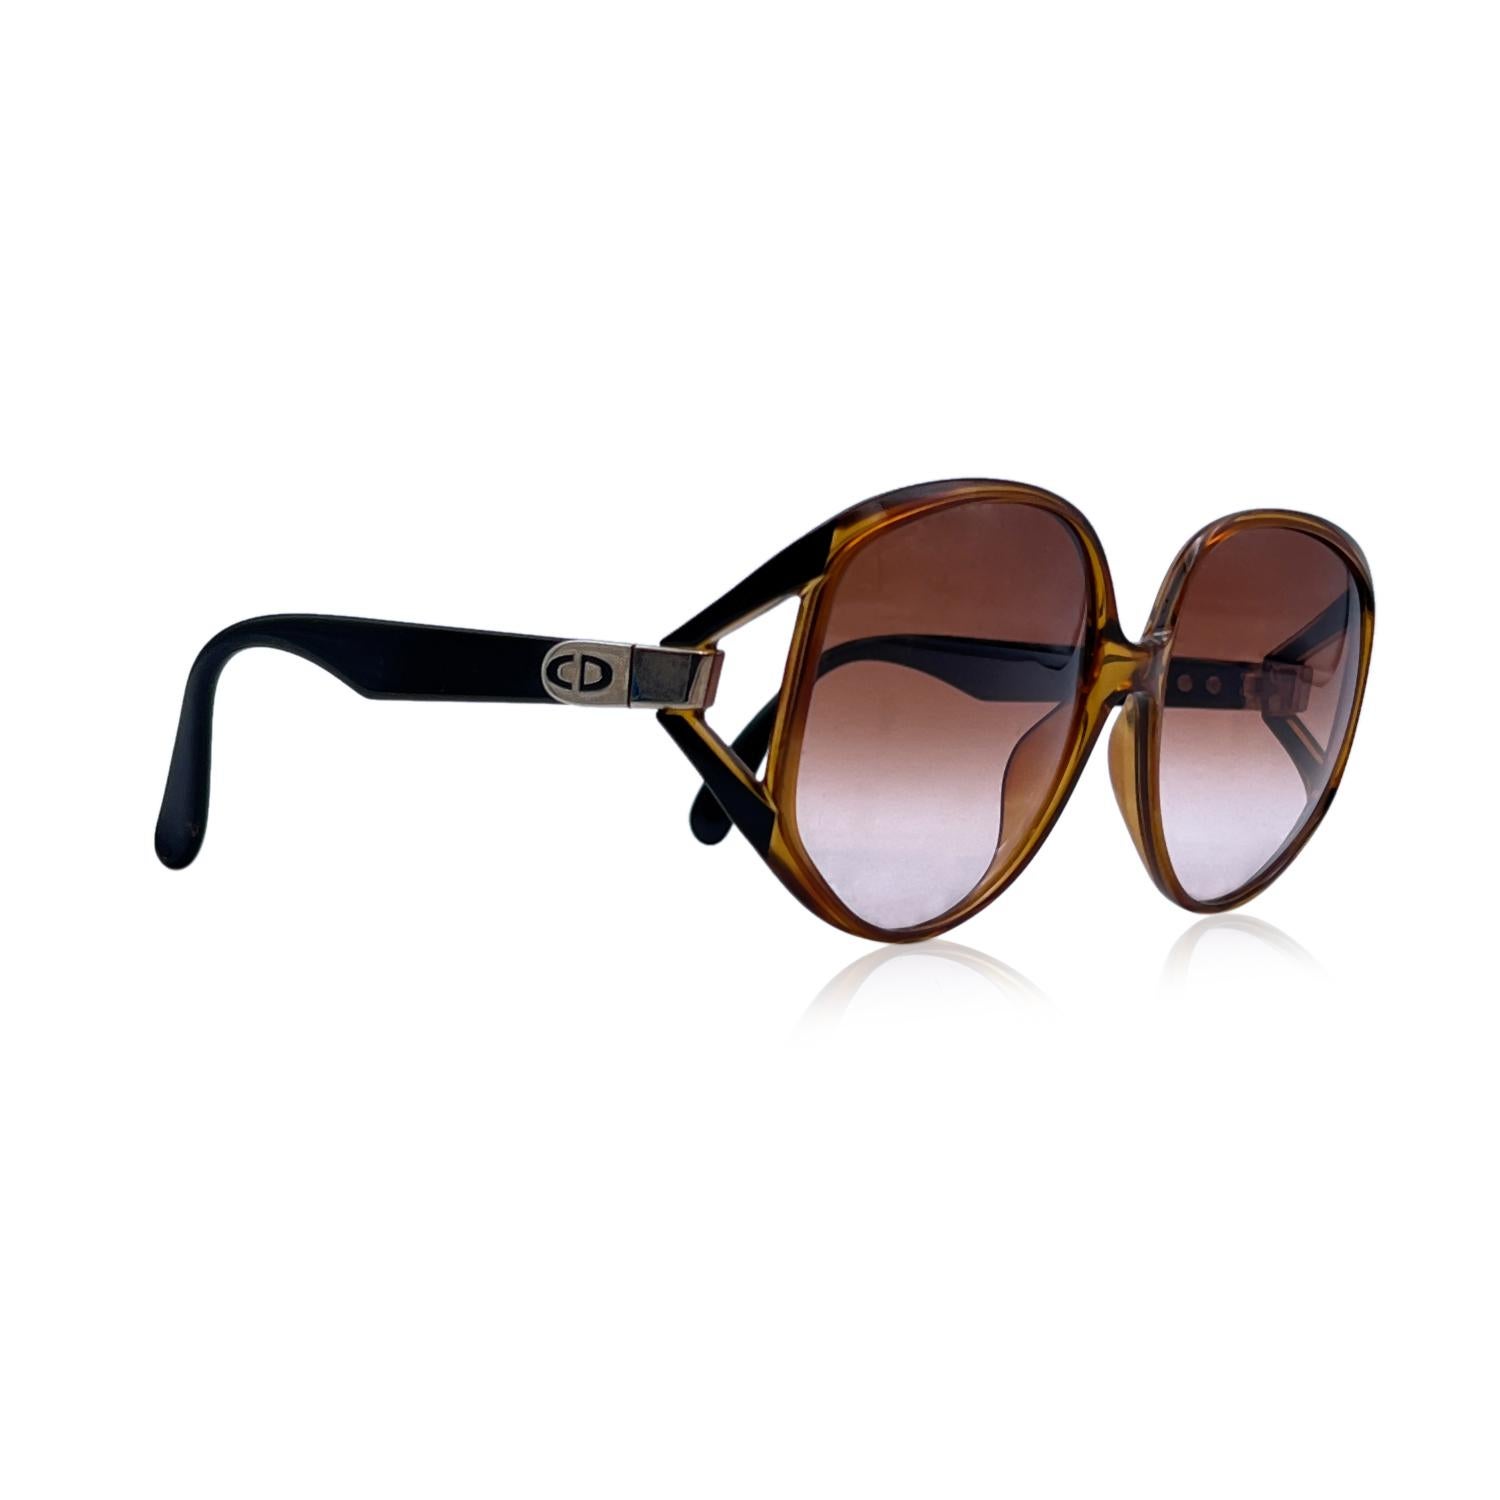 CHRISTIAN DIOR Vintage 1980s sunglasses, mod. 2320. Brown Optyl frame with black ear stems. Oversized design. Brown gradient lenses. Handmade in Germany. CD logo on temples. Mod. & Refs: 2320 - 10 - 62/16

Details

MATERIAL: Acetate

COLOR: